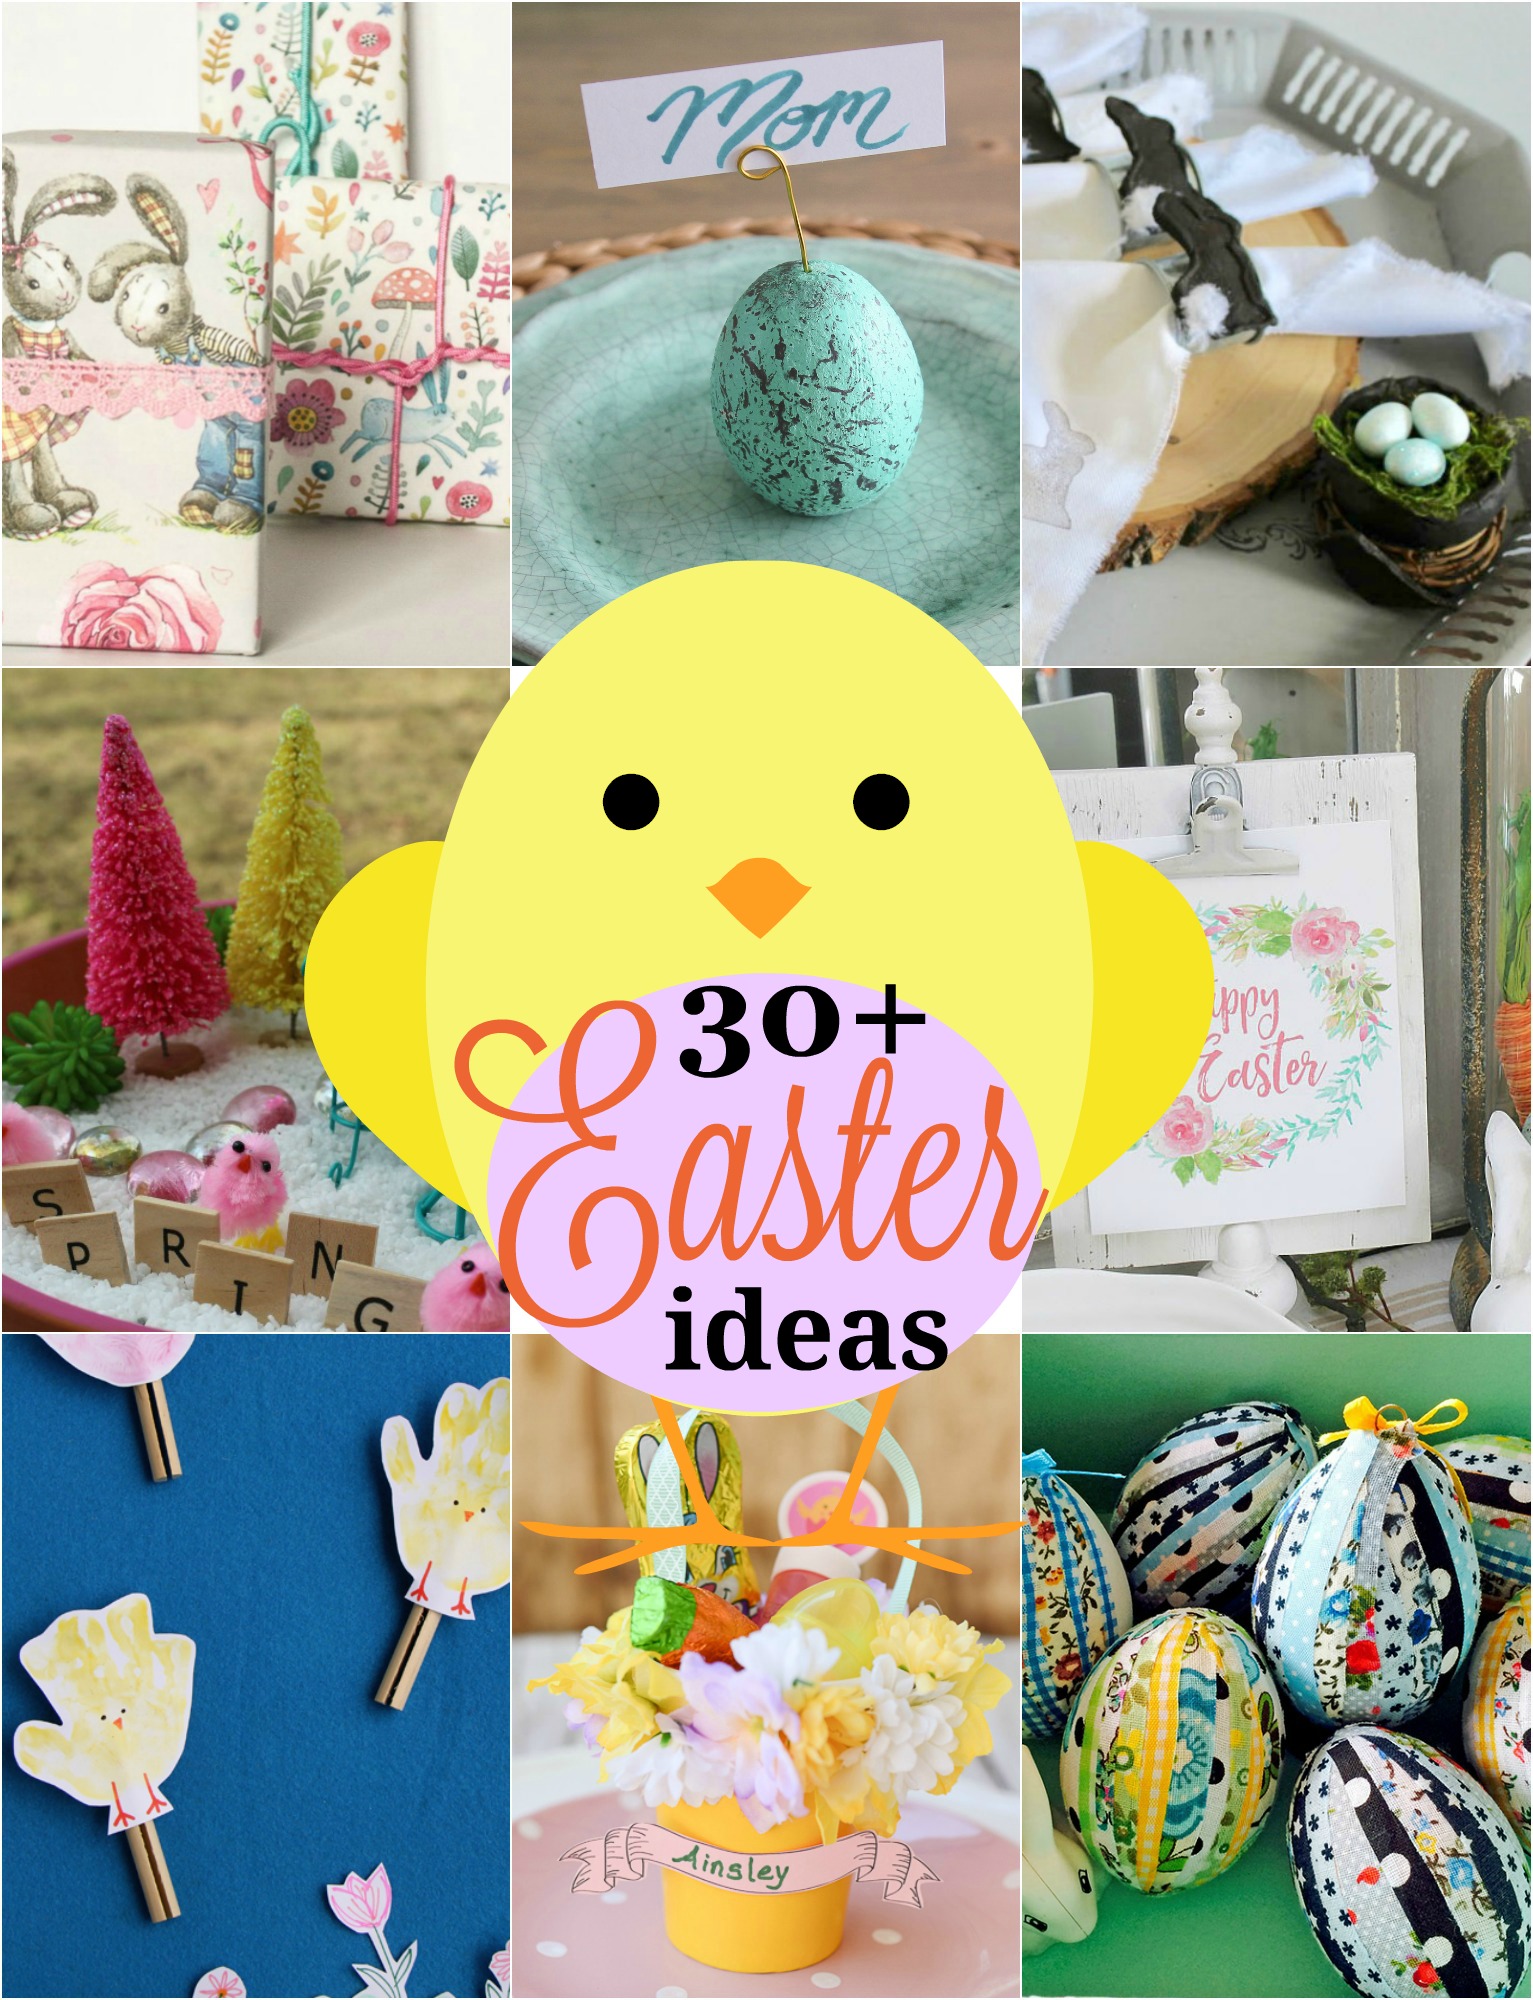 30+ Easter Craft and Decor Ideas